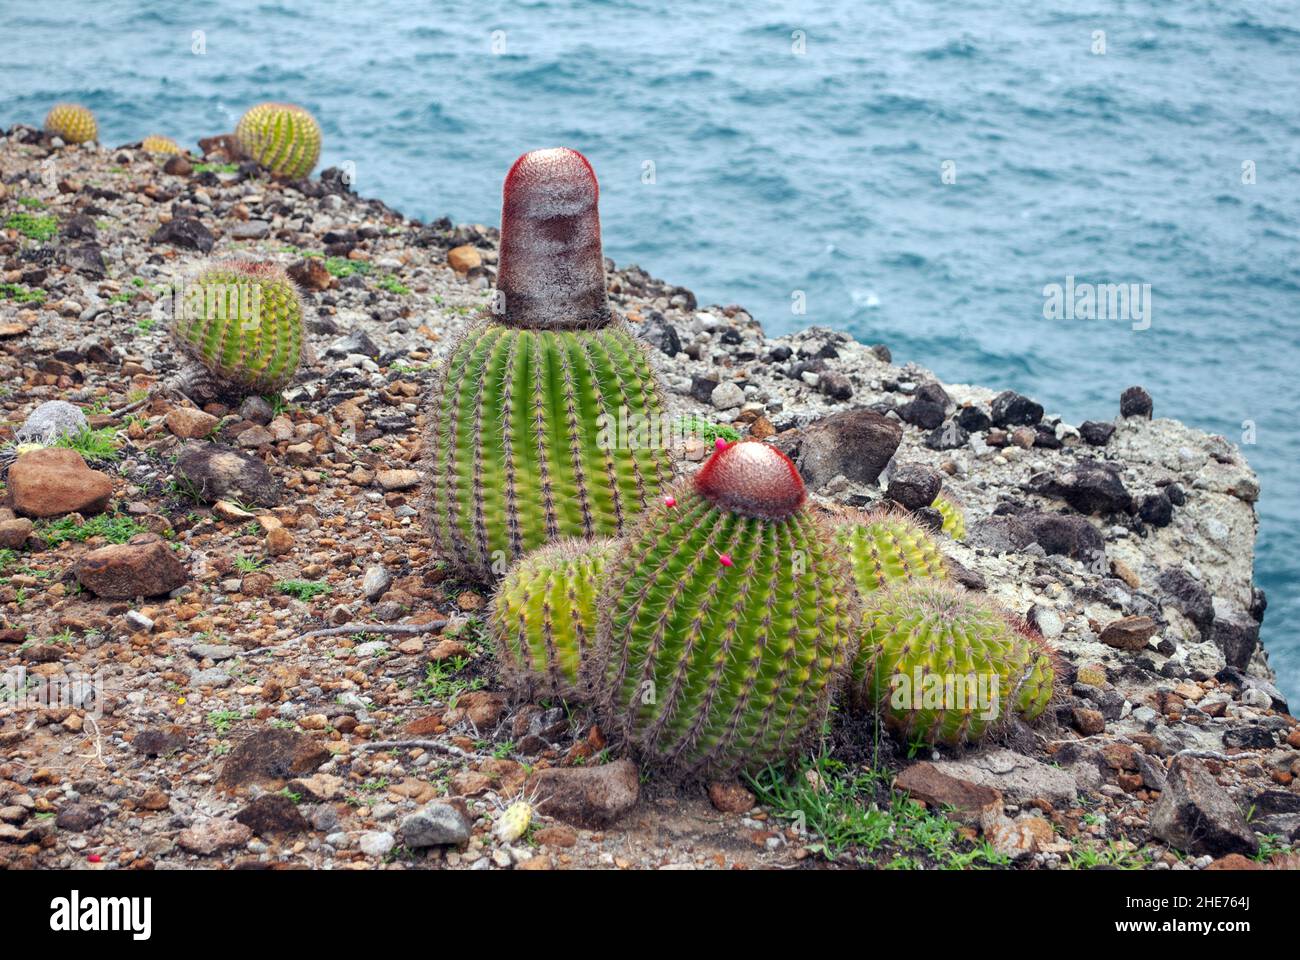 Melocactus intortus is a common Caribbean species of cactus. The pictures were taken on St Lucia. Stock Photo